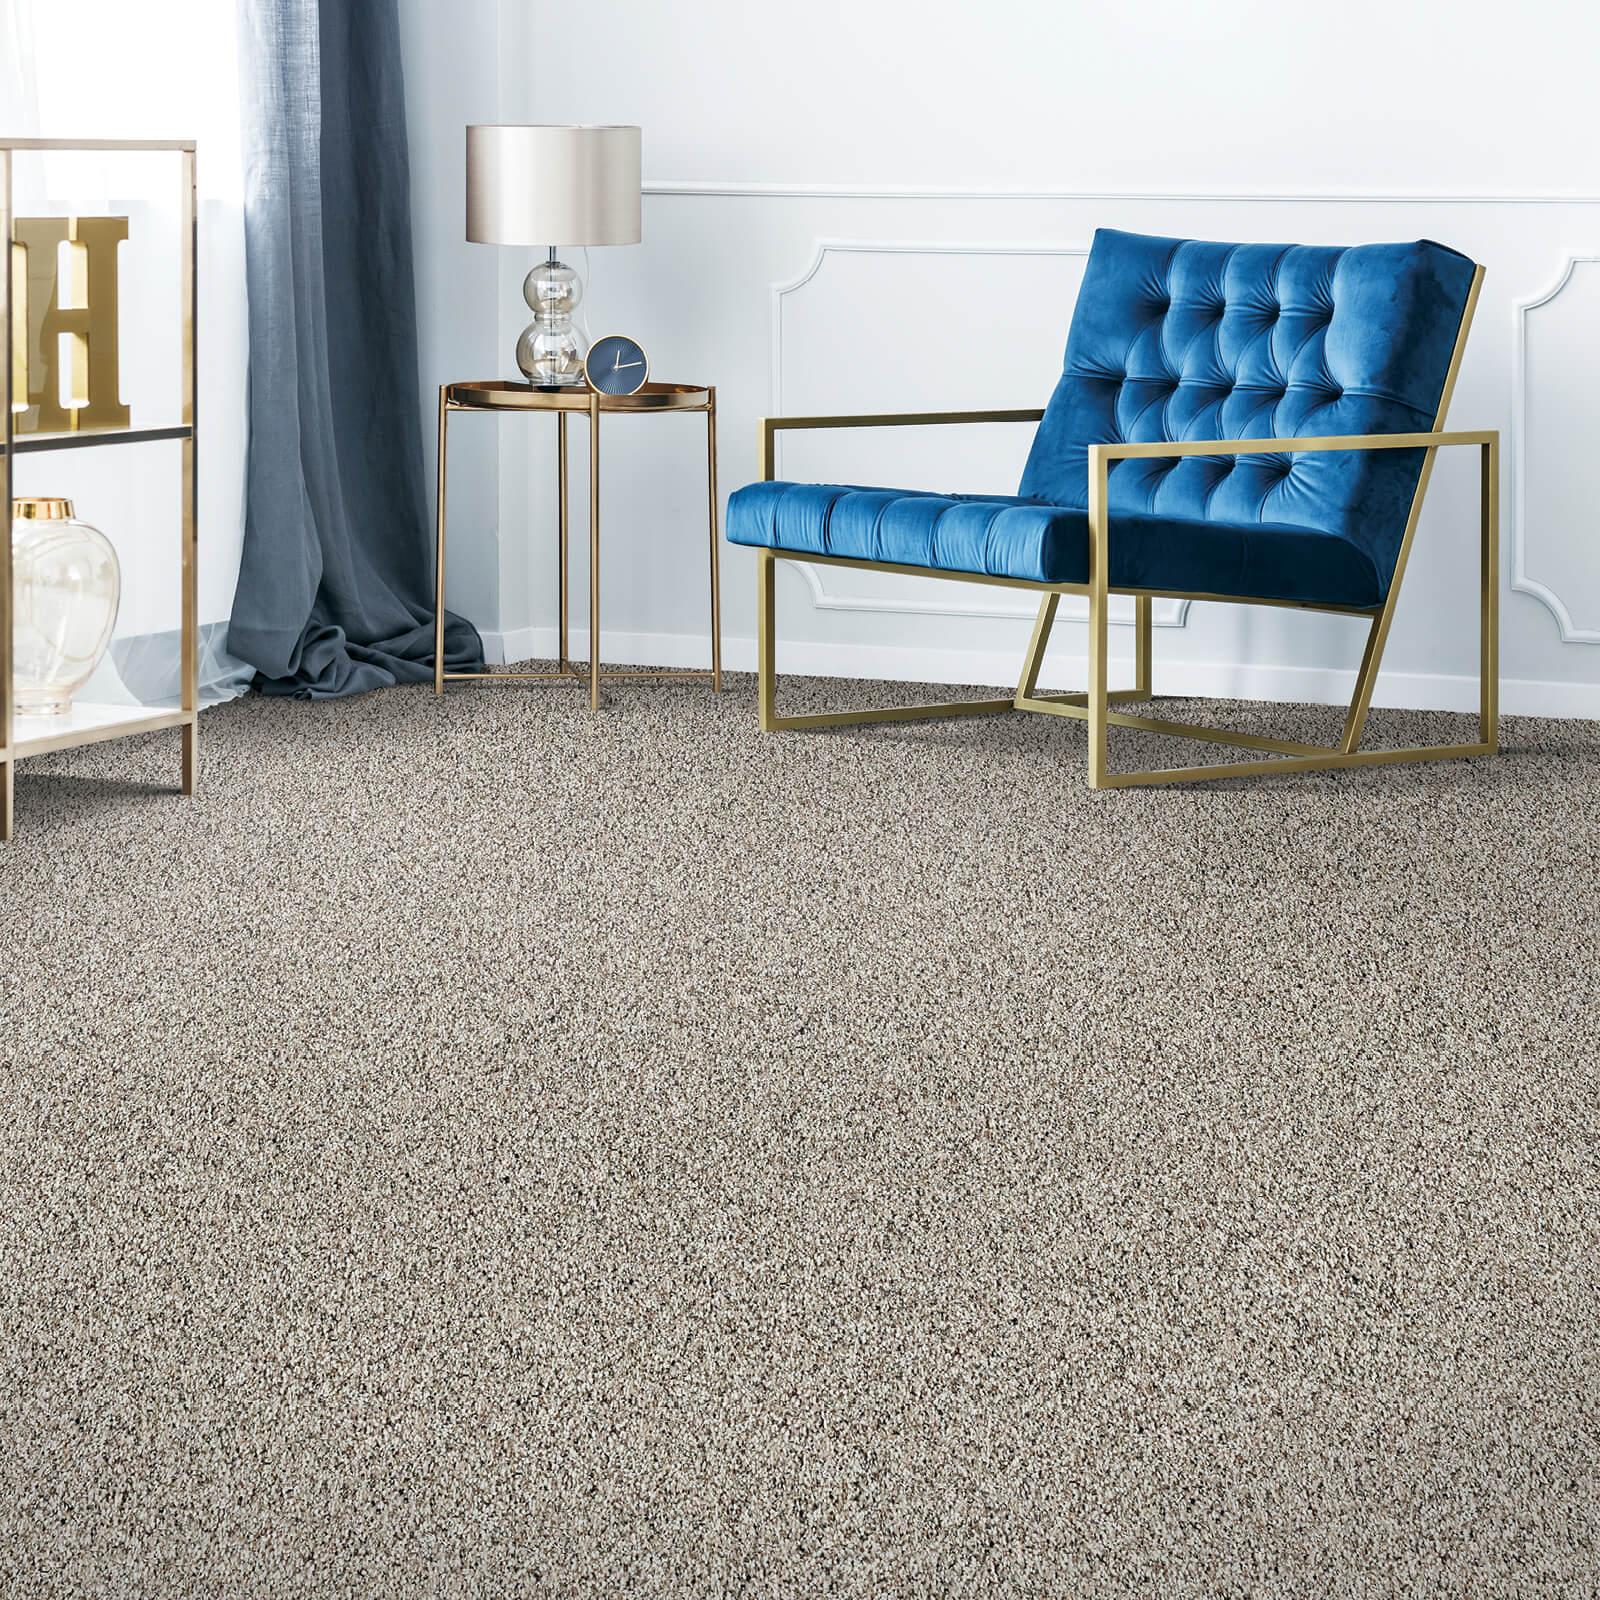 Choose Carpet For Allergies, Paneling Factory Of Virginia DBA Cabinet Factory